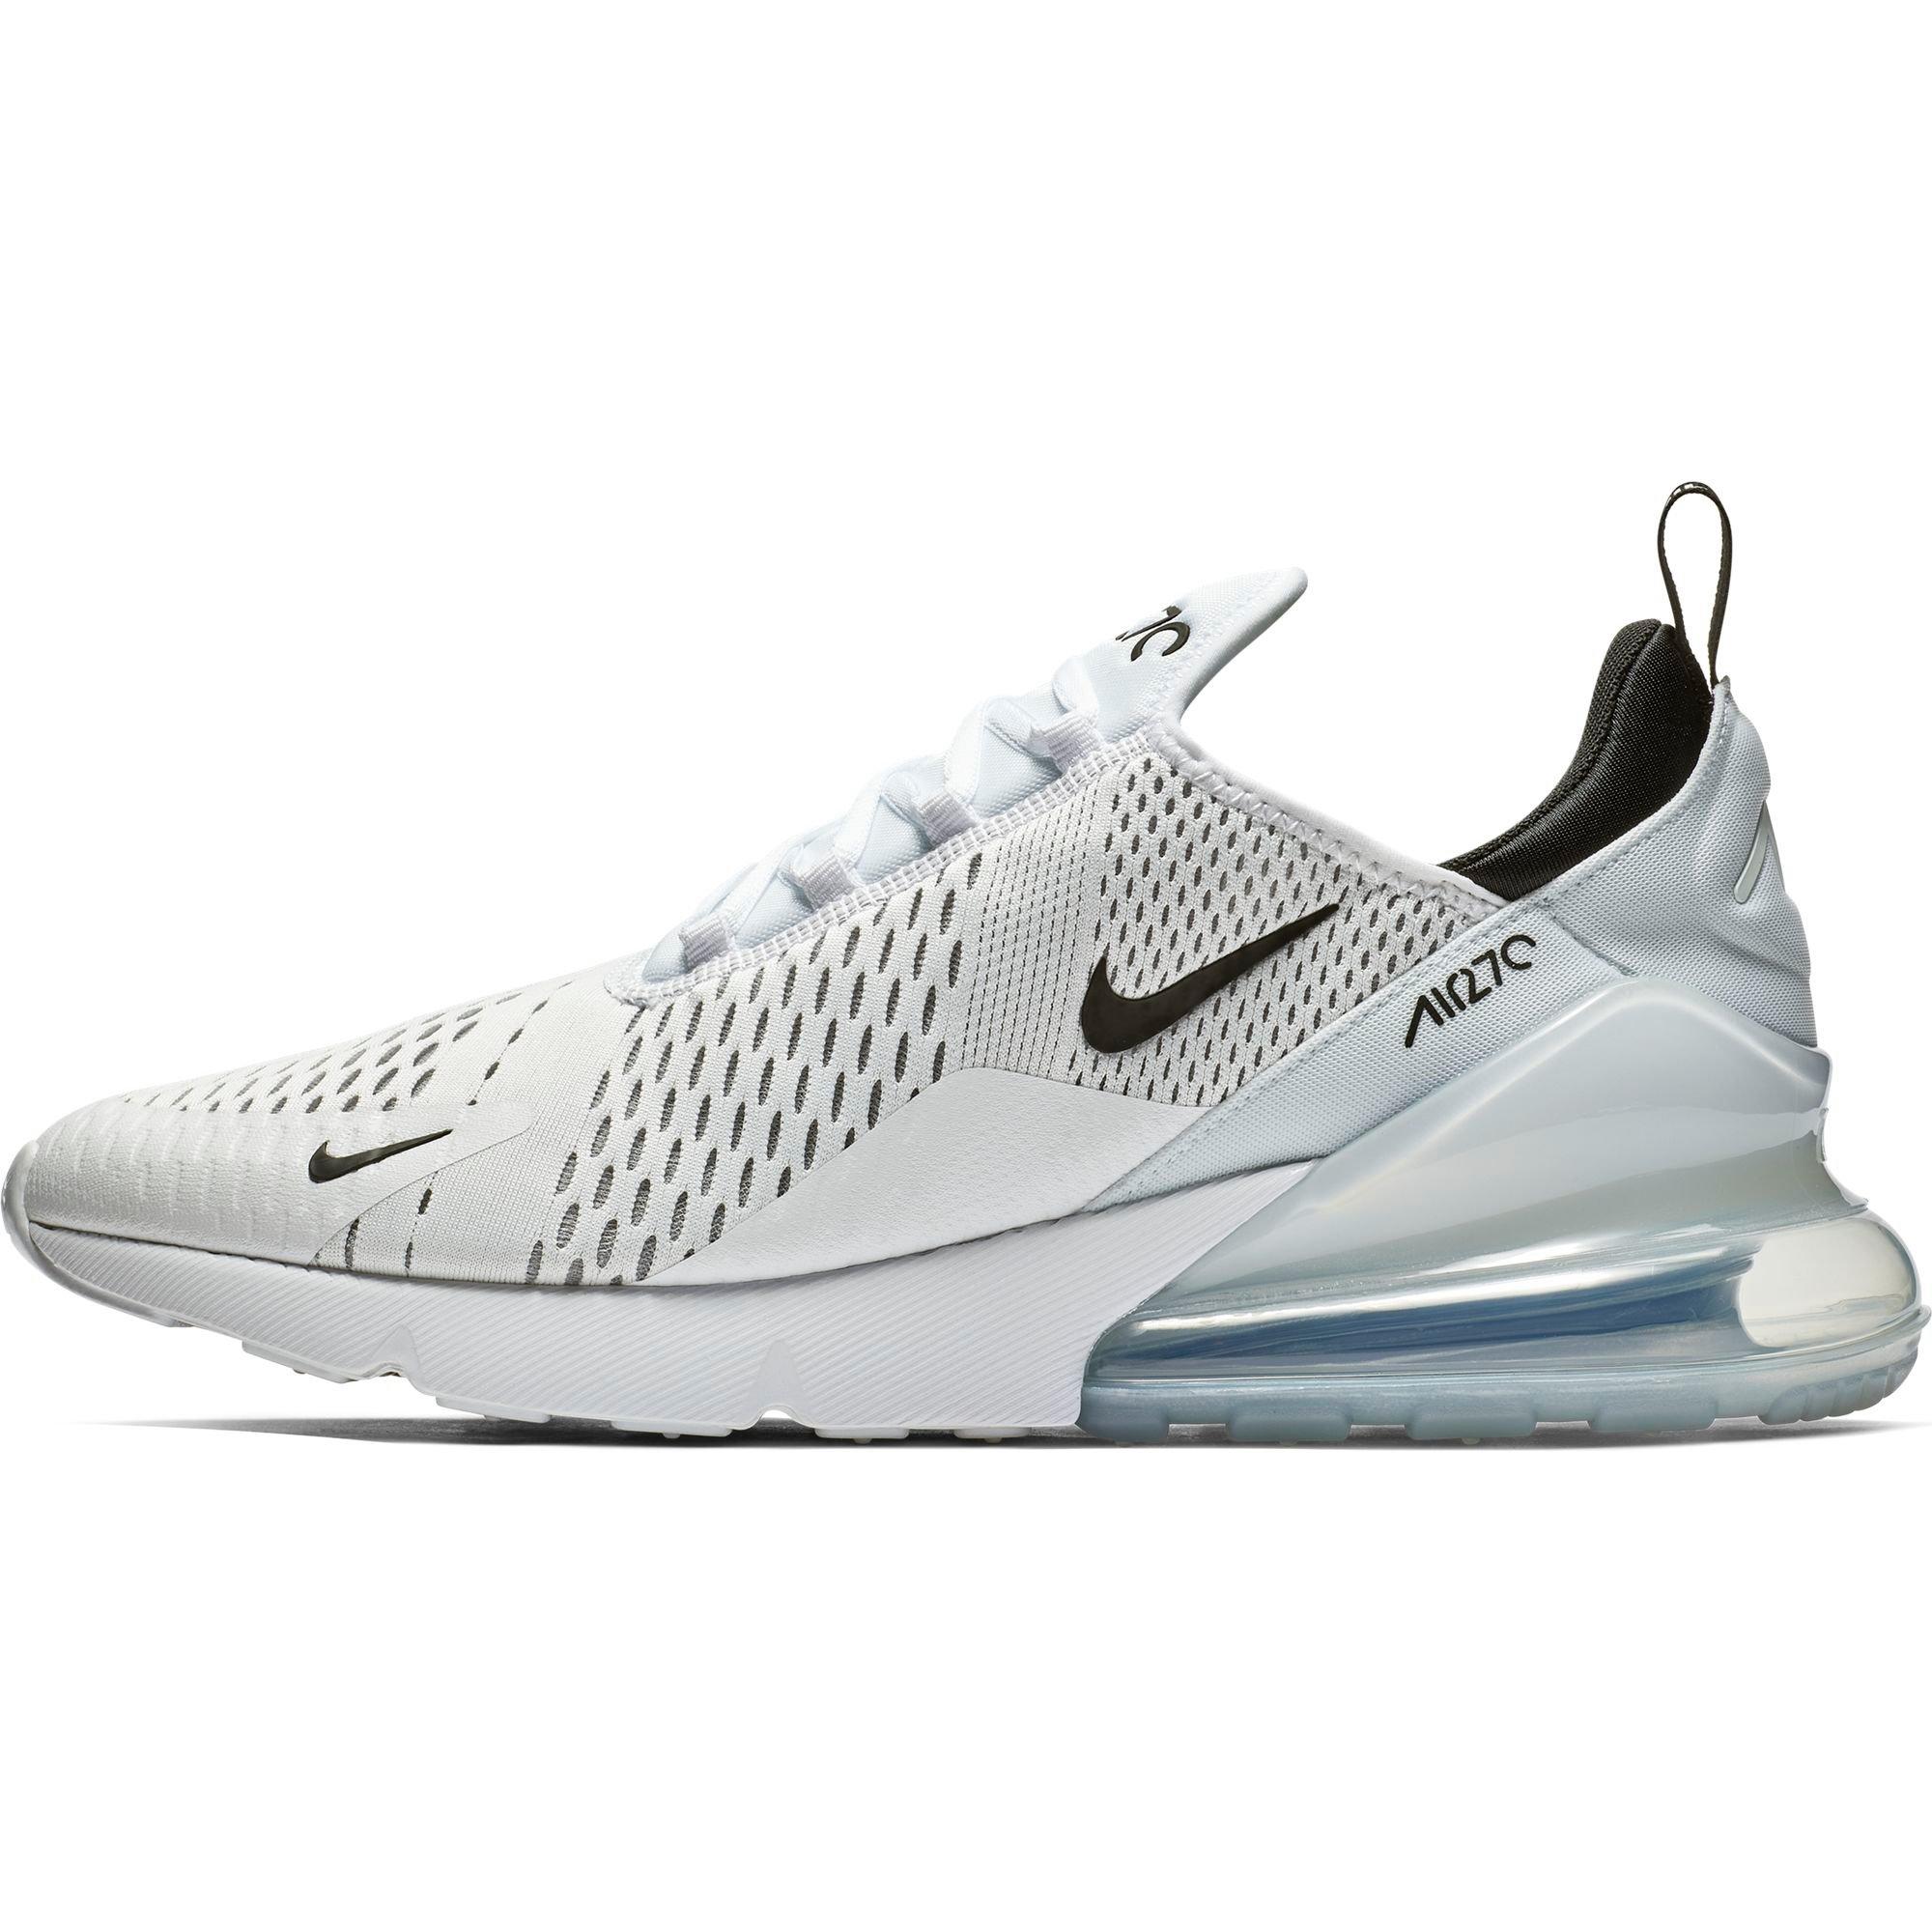 Men's Nike Air Max 270 Shoes, 9, White/Red/Navy